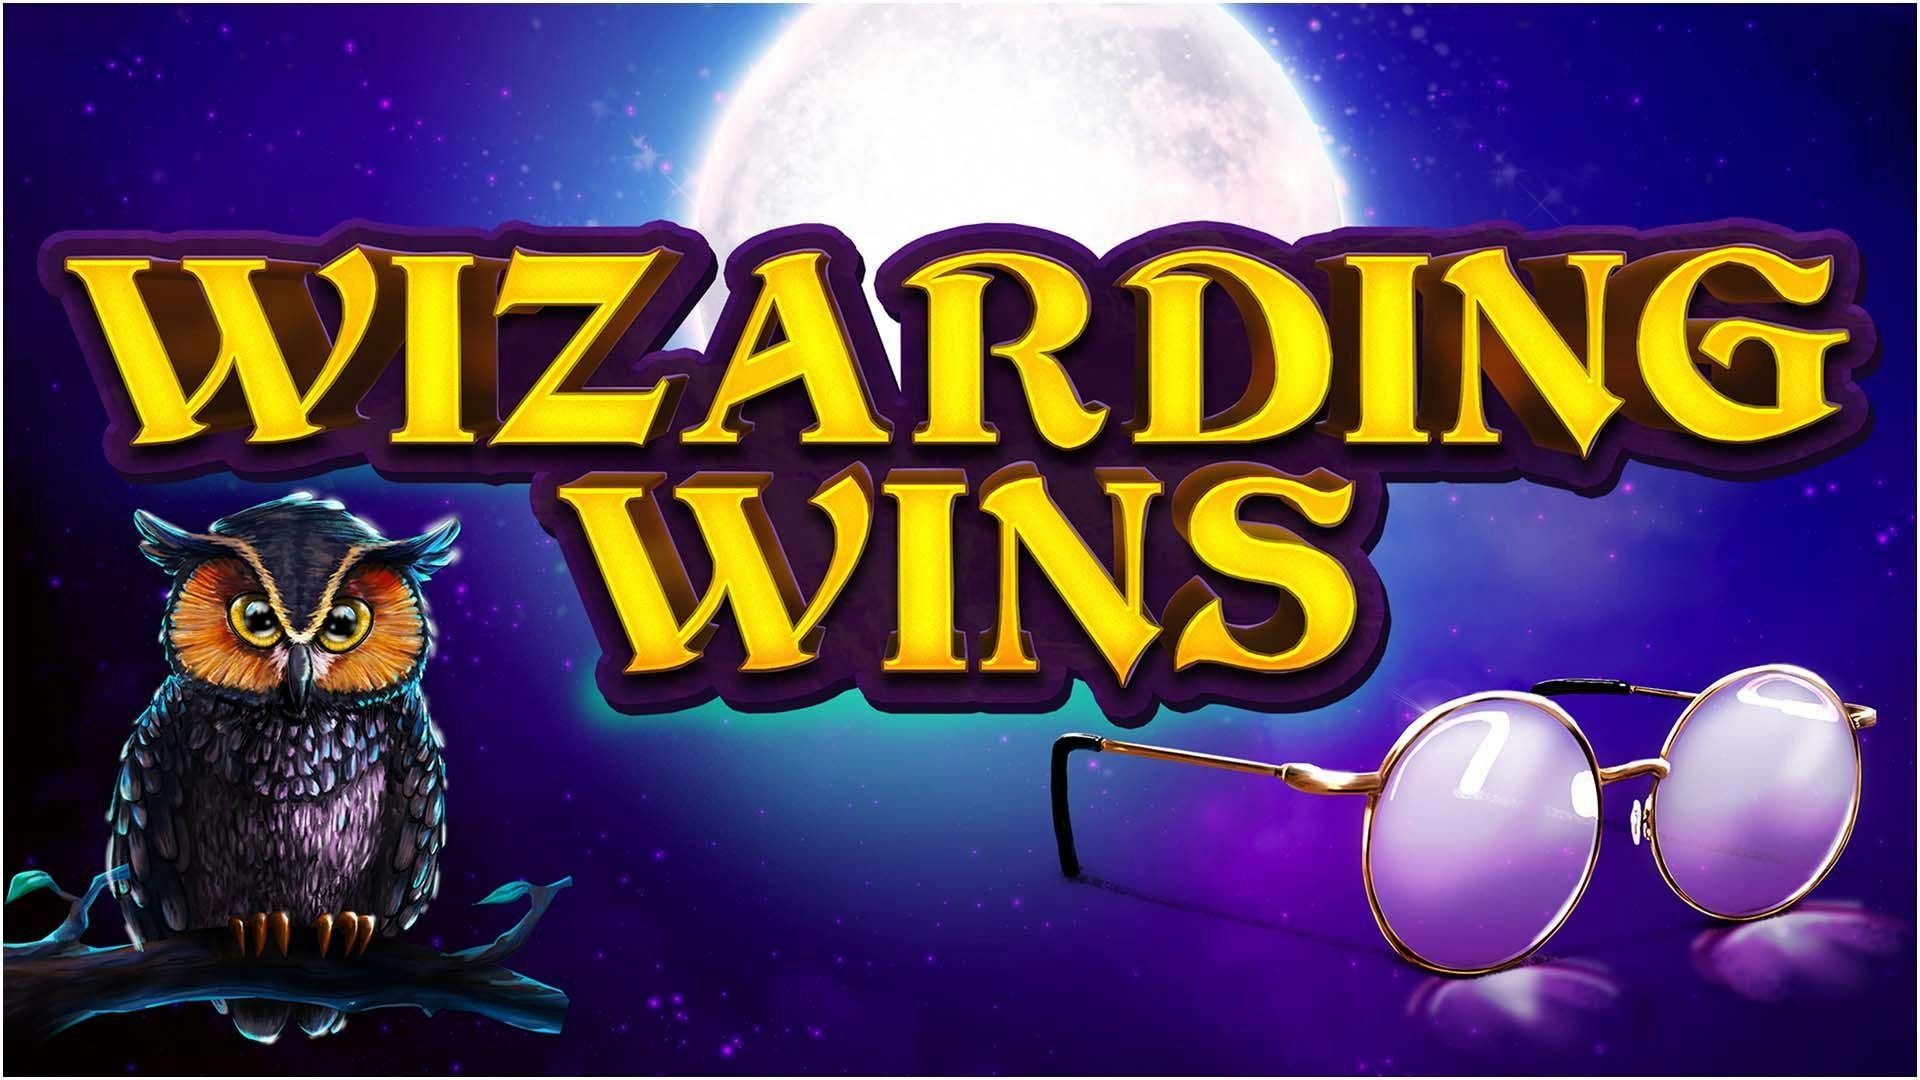 Wizarding Wins Slot Machine Online Free Game Play